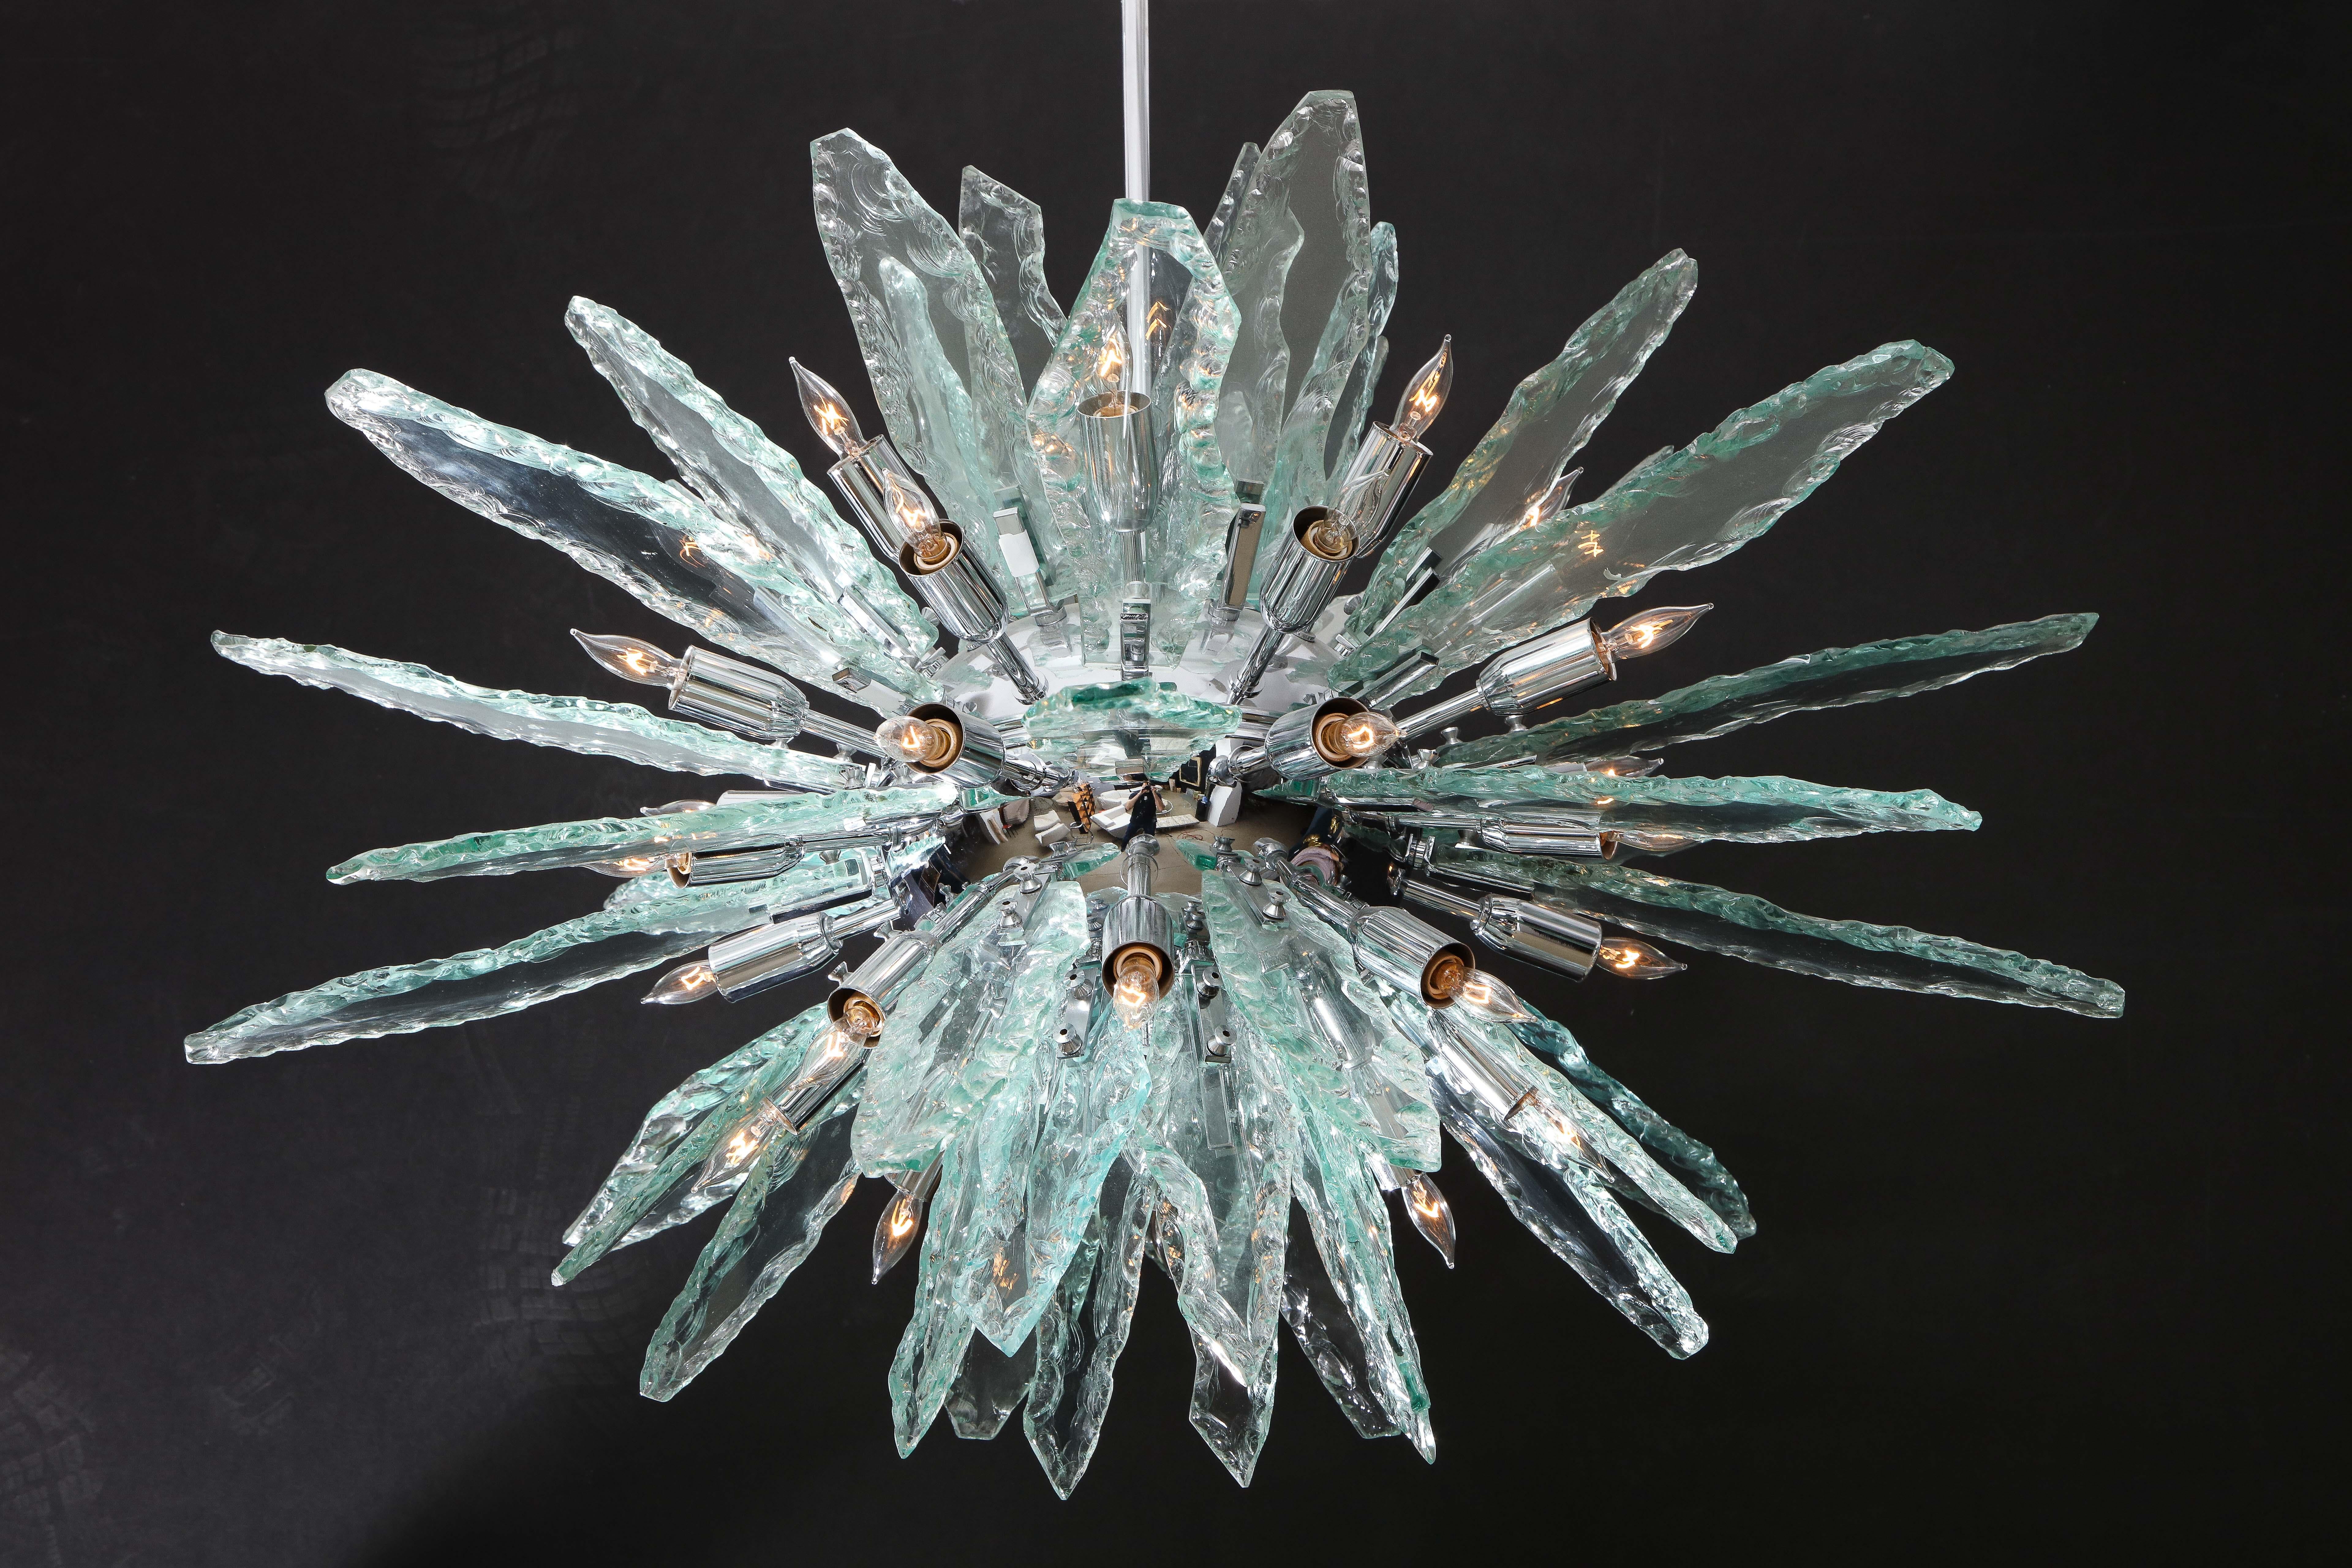 Large Italian Sputnik chandelier in the style of Fontana Arte consisting of six rows of thick, flat, jagged edge hand blown clear glass slabs that screw into a chrome 34 inch diameter frame with 26 sockets accommodating candelabra bulbs, suspended